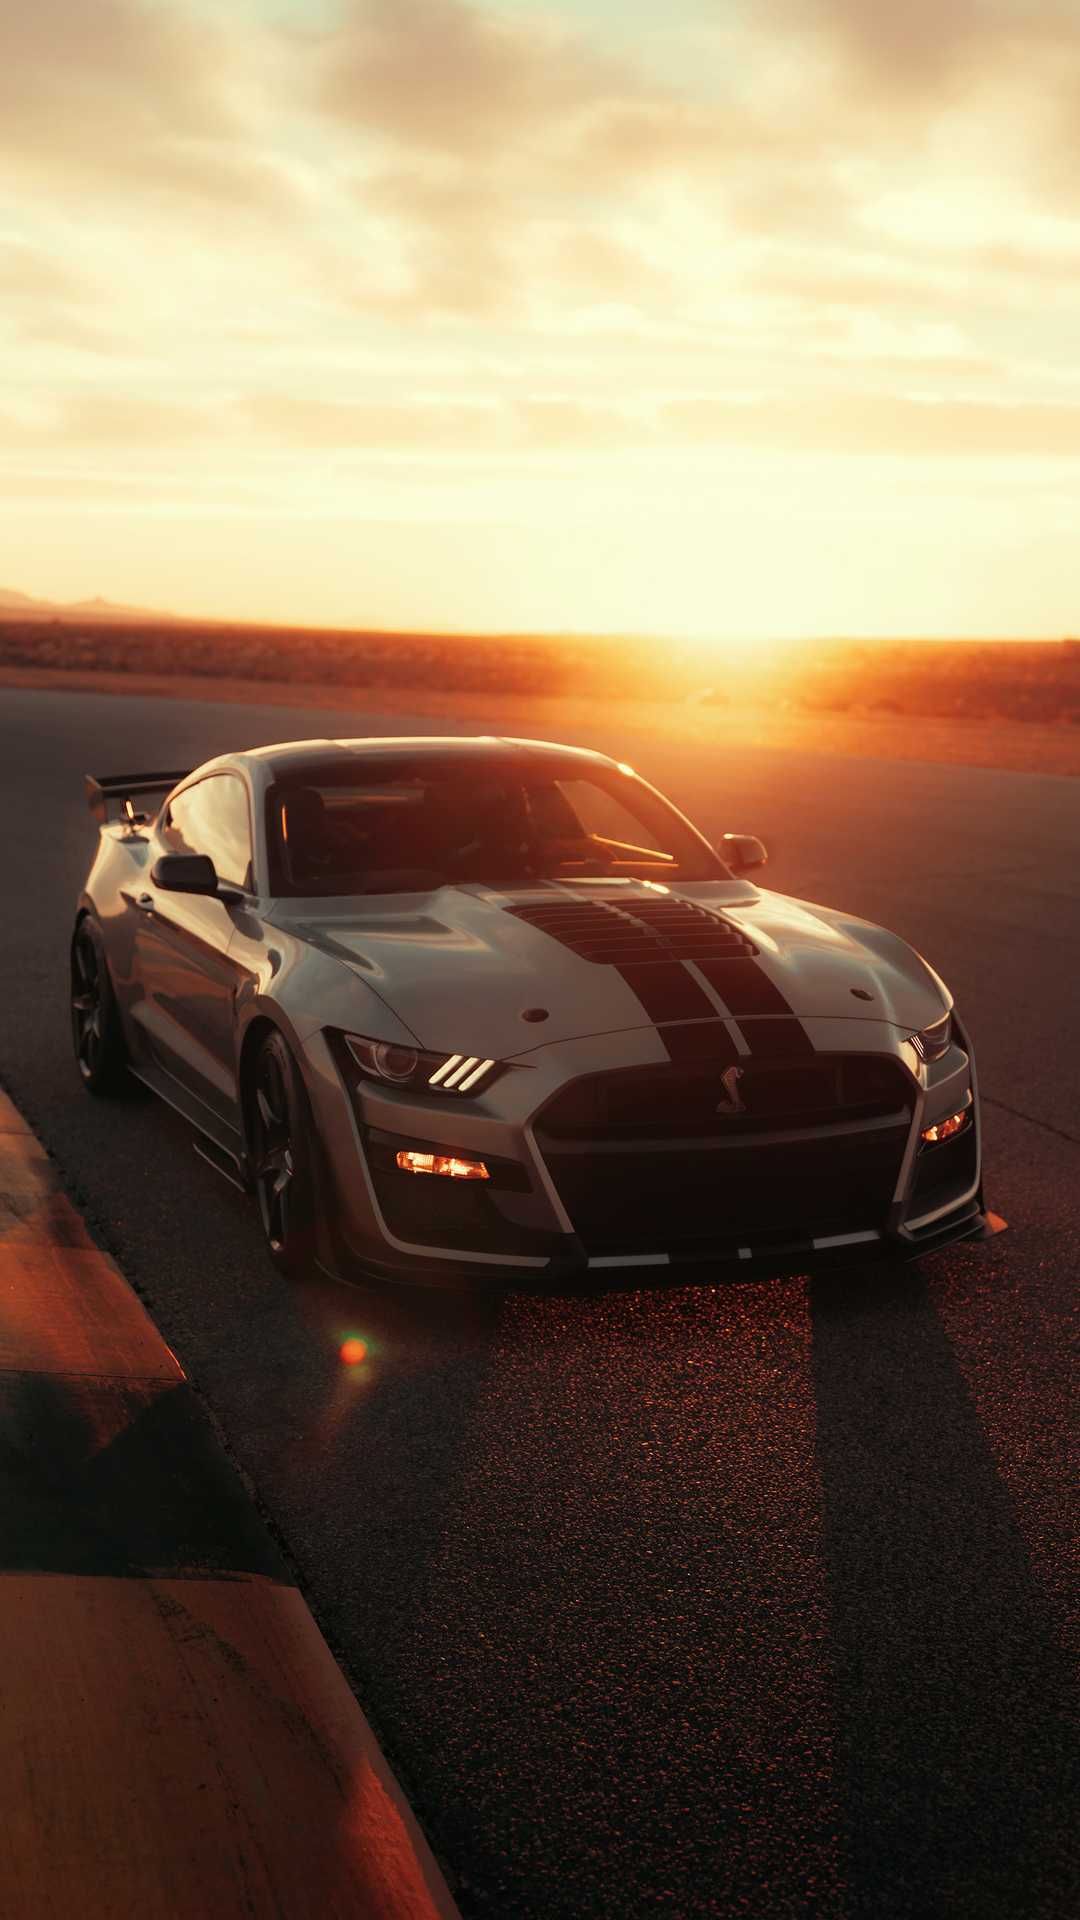 Ford Mustang Shelby GT500 Wallpaper Free Ford Mustang Shelby GT500 Background